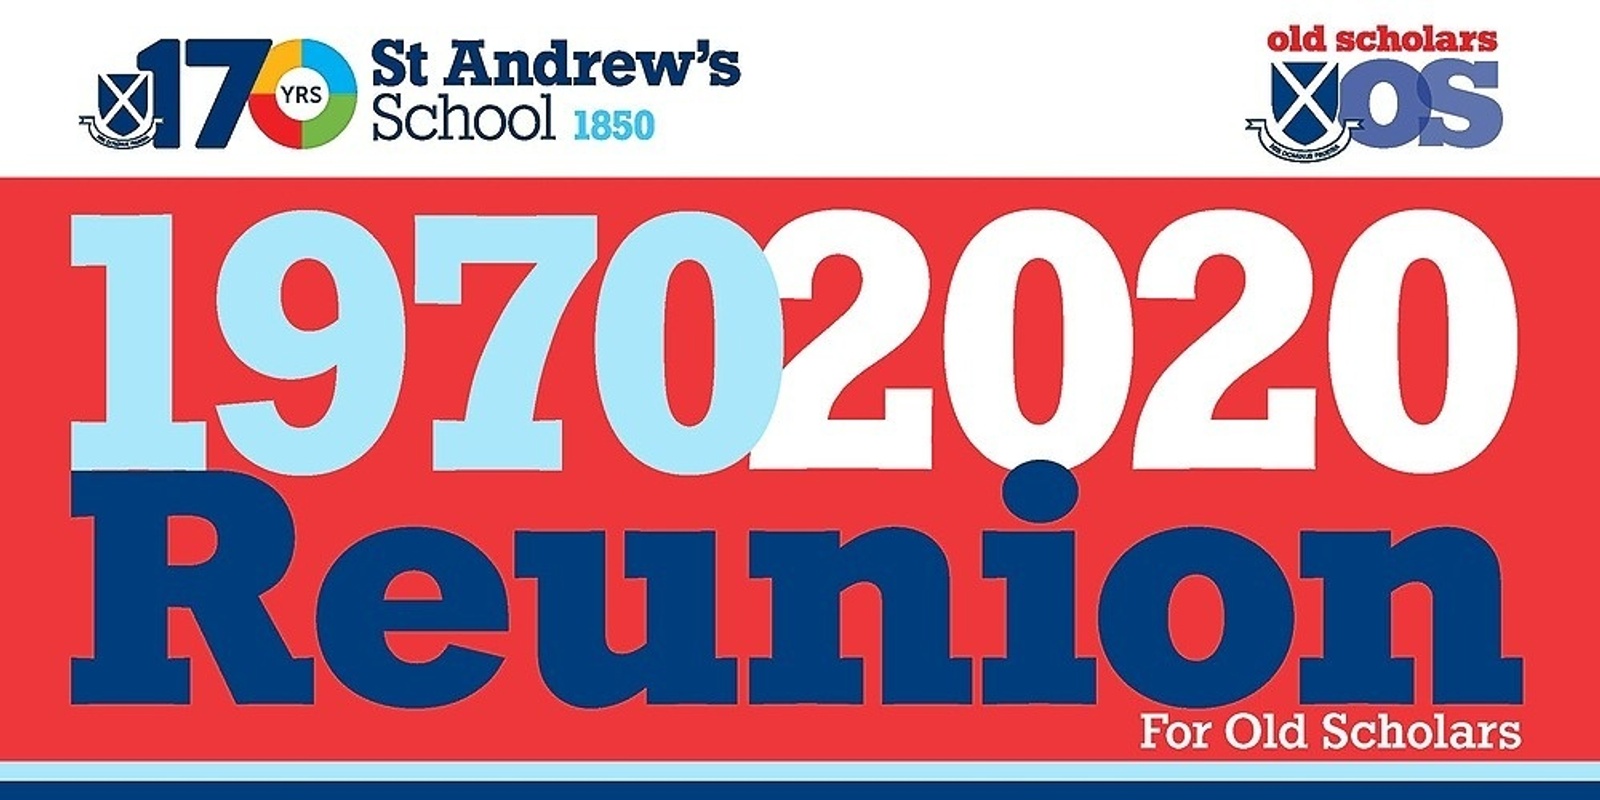 Banner image for Alumni Year of 1970 Reunion